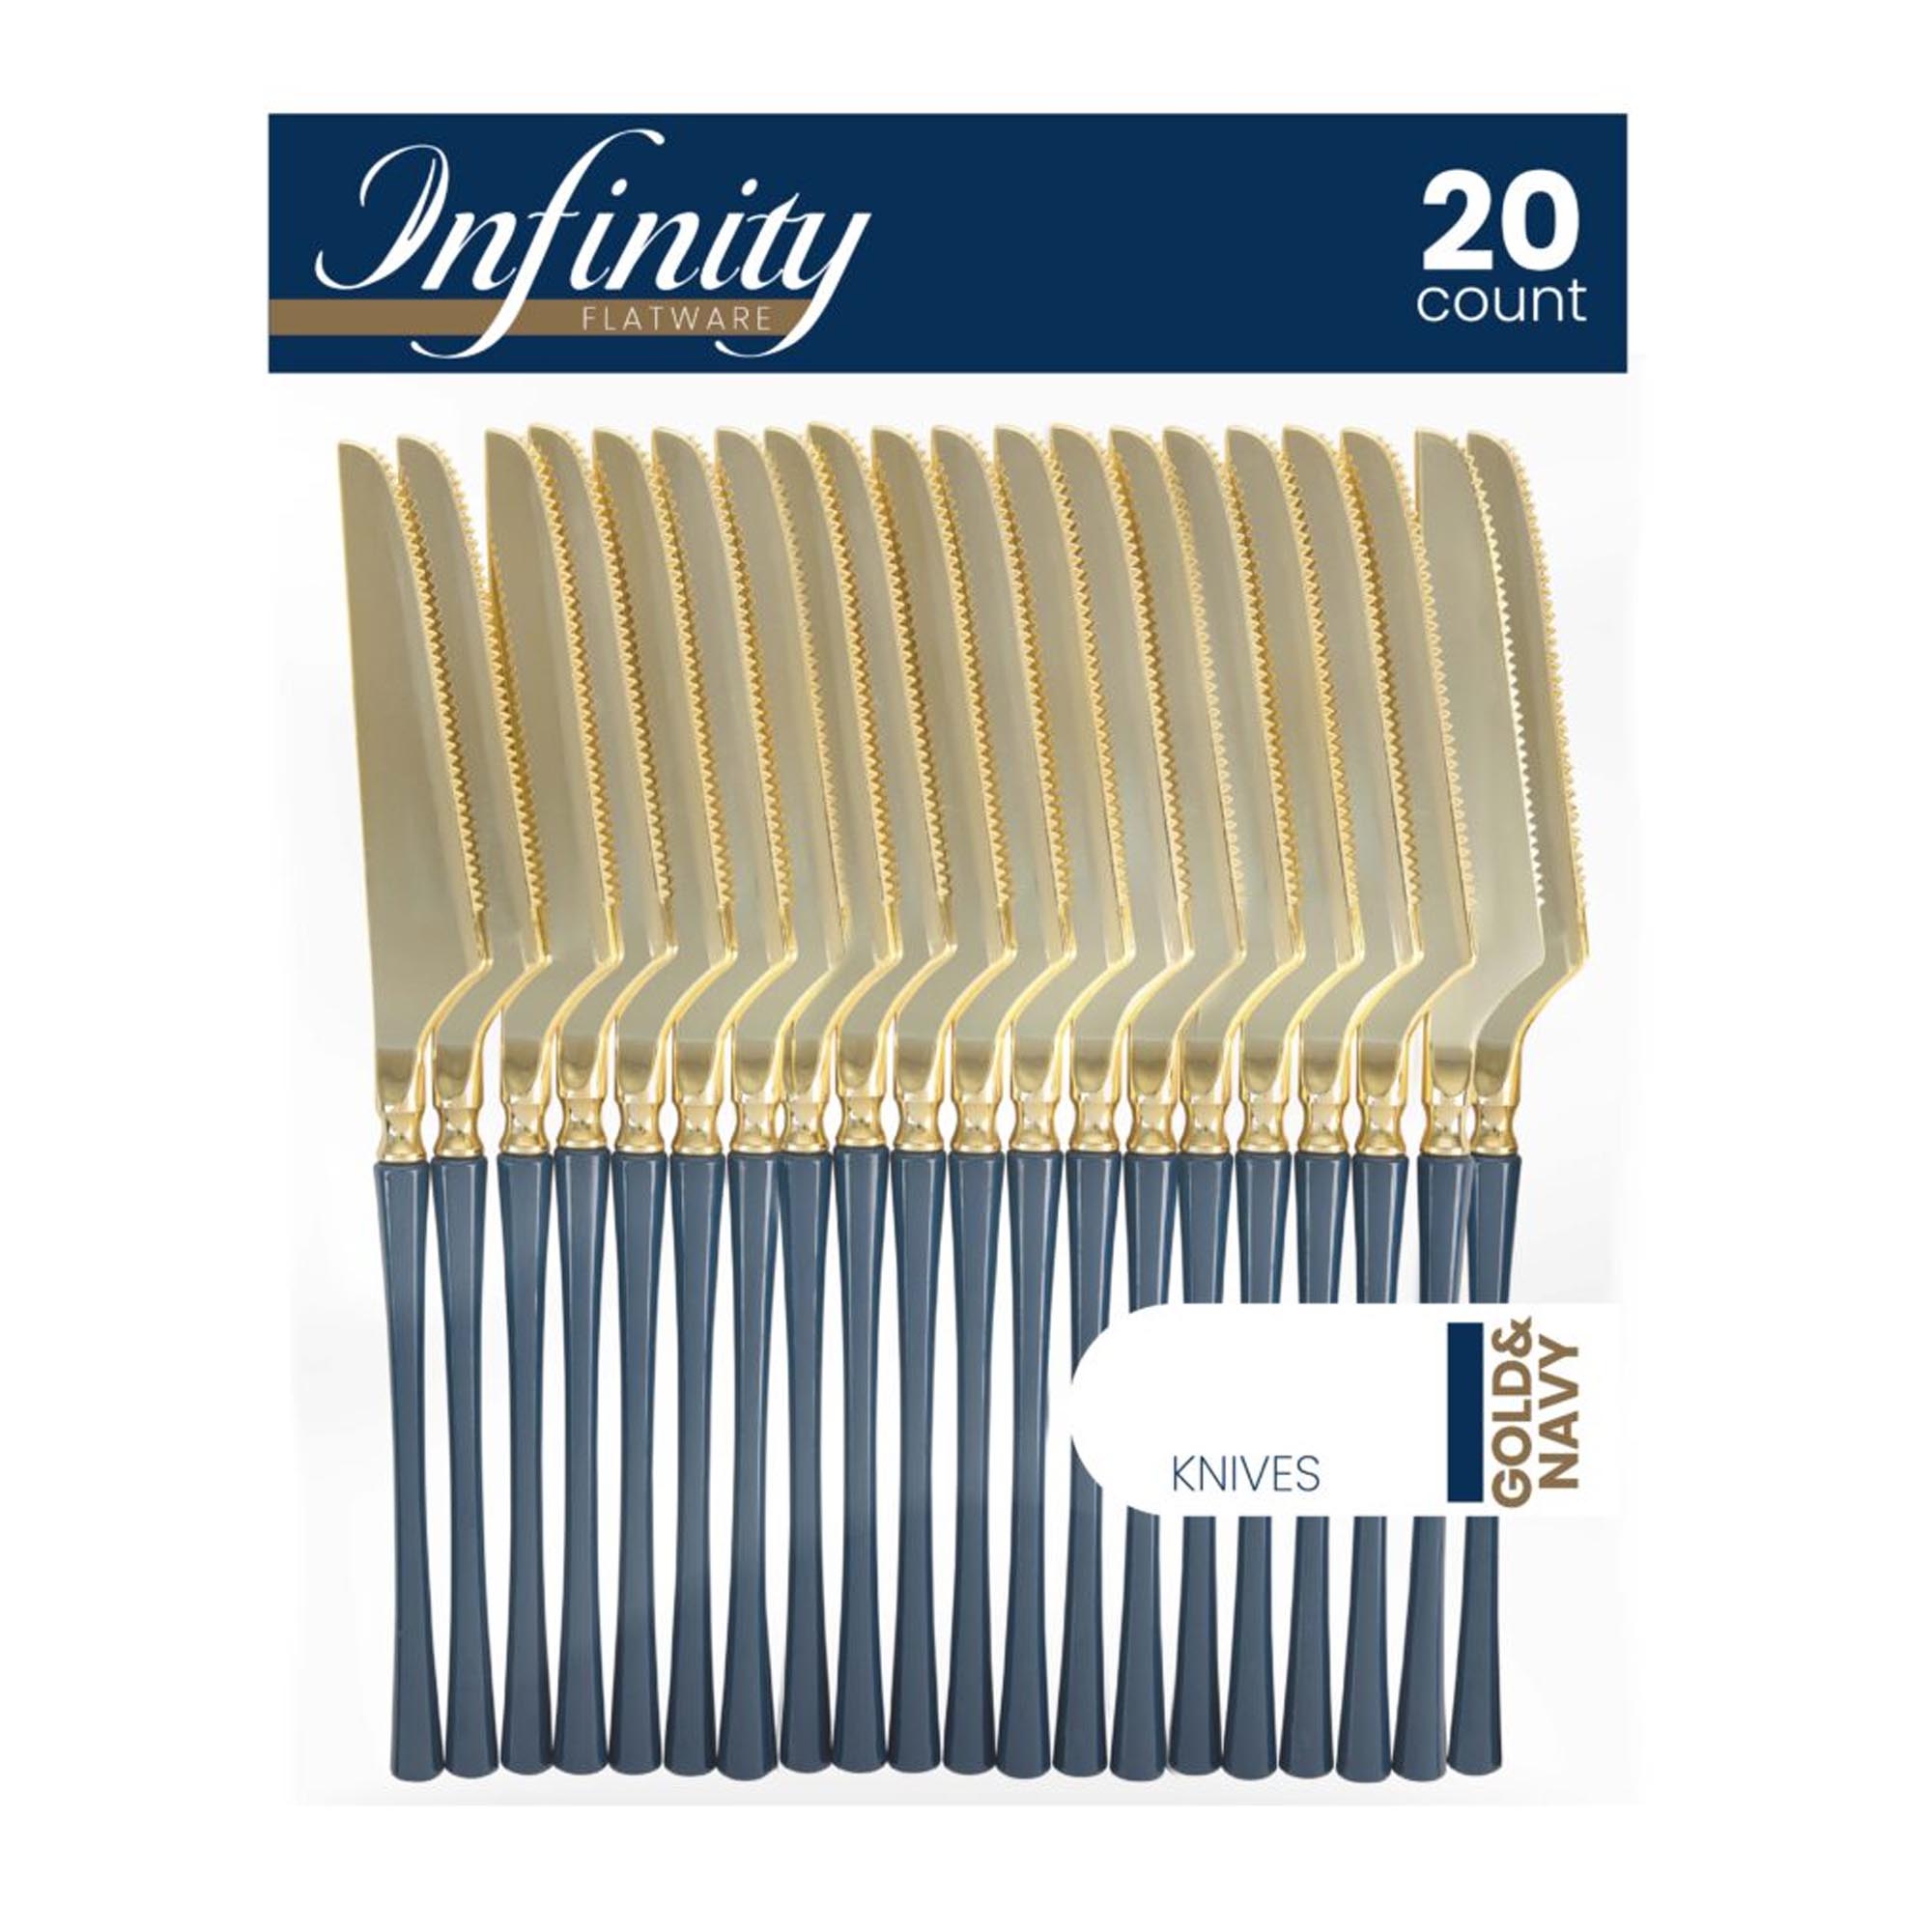 Plastic Knives Navy Blue and Gold Infinity Flatware Collection